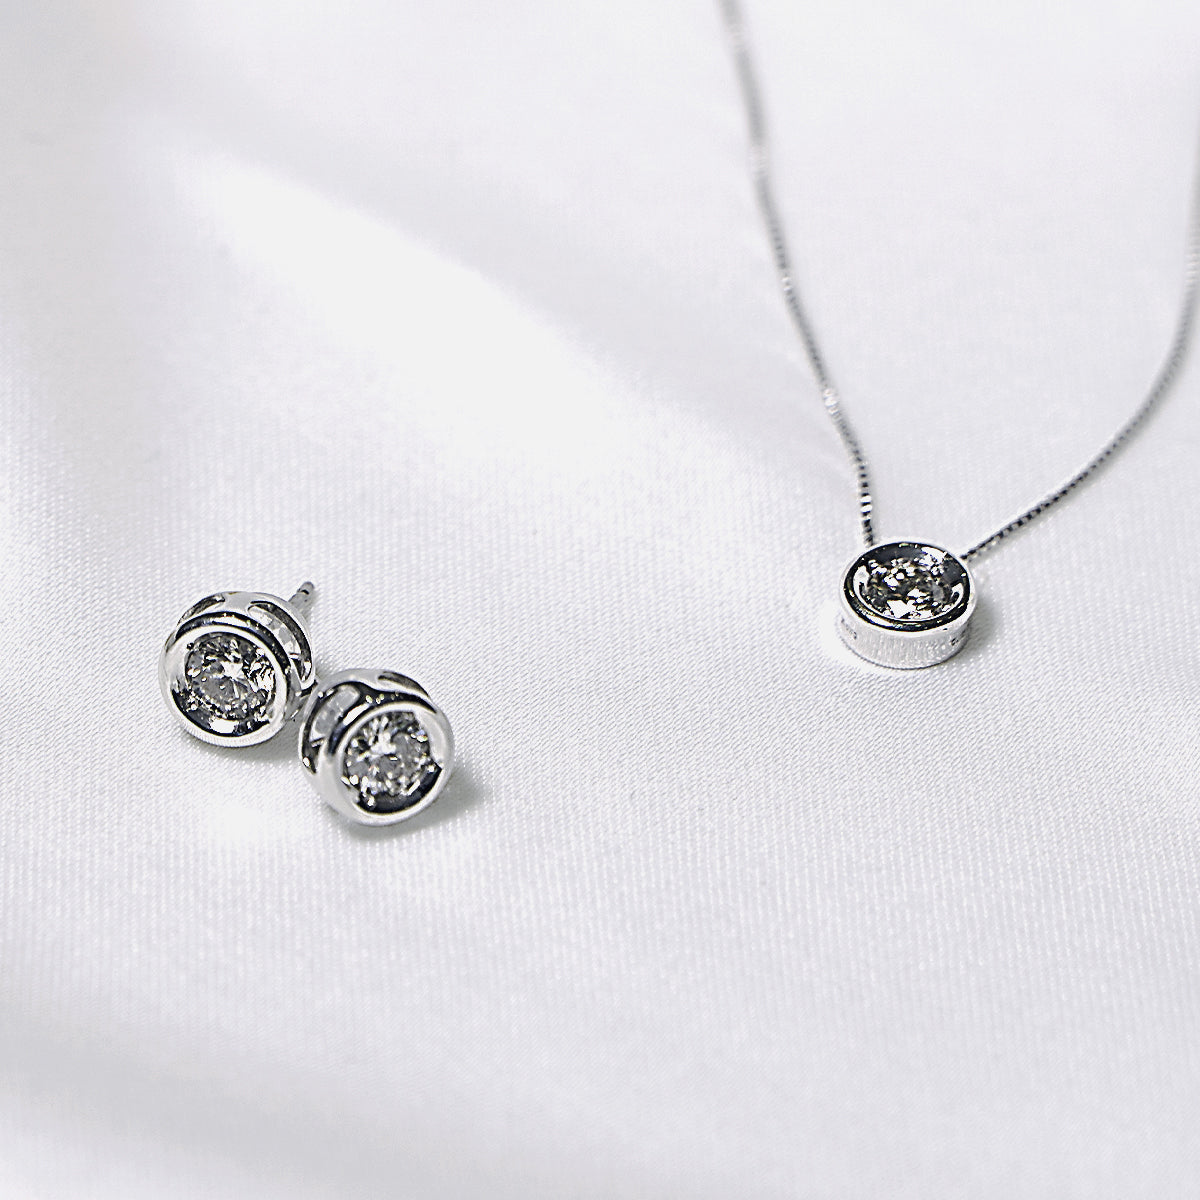 White Gold Necklace and Earring Set | Meicel Jewelry Store